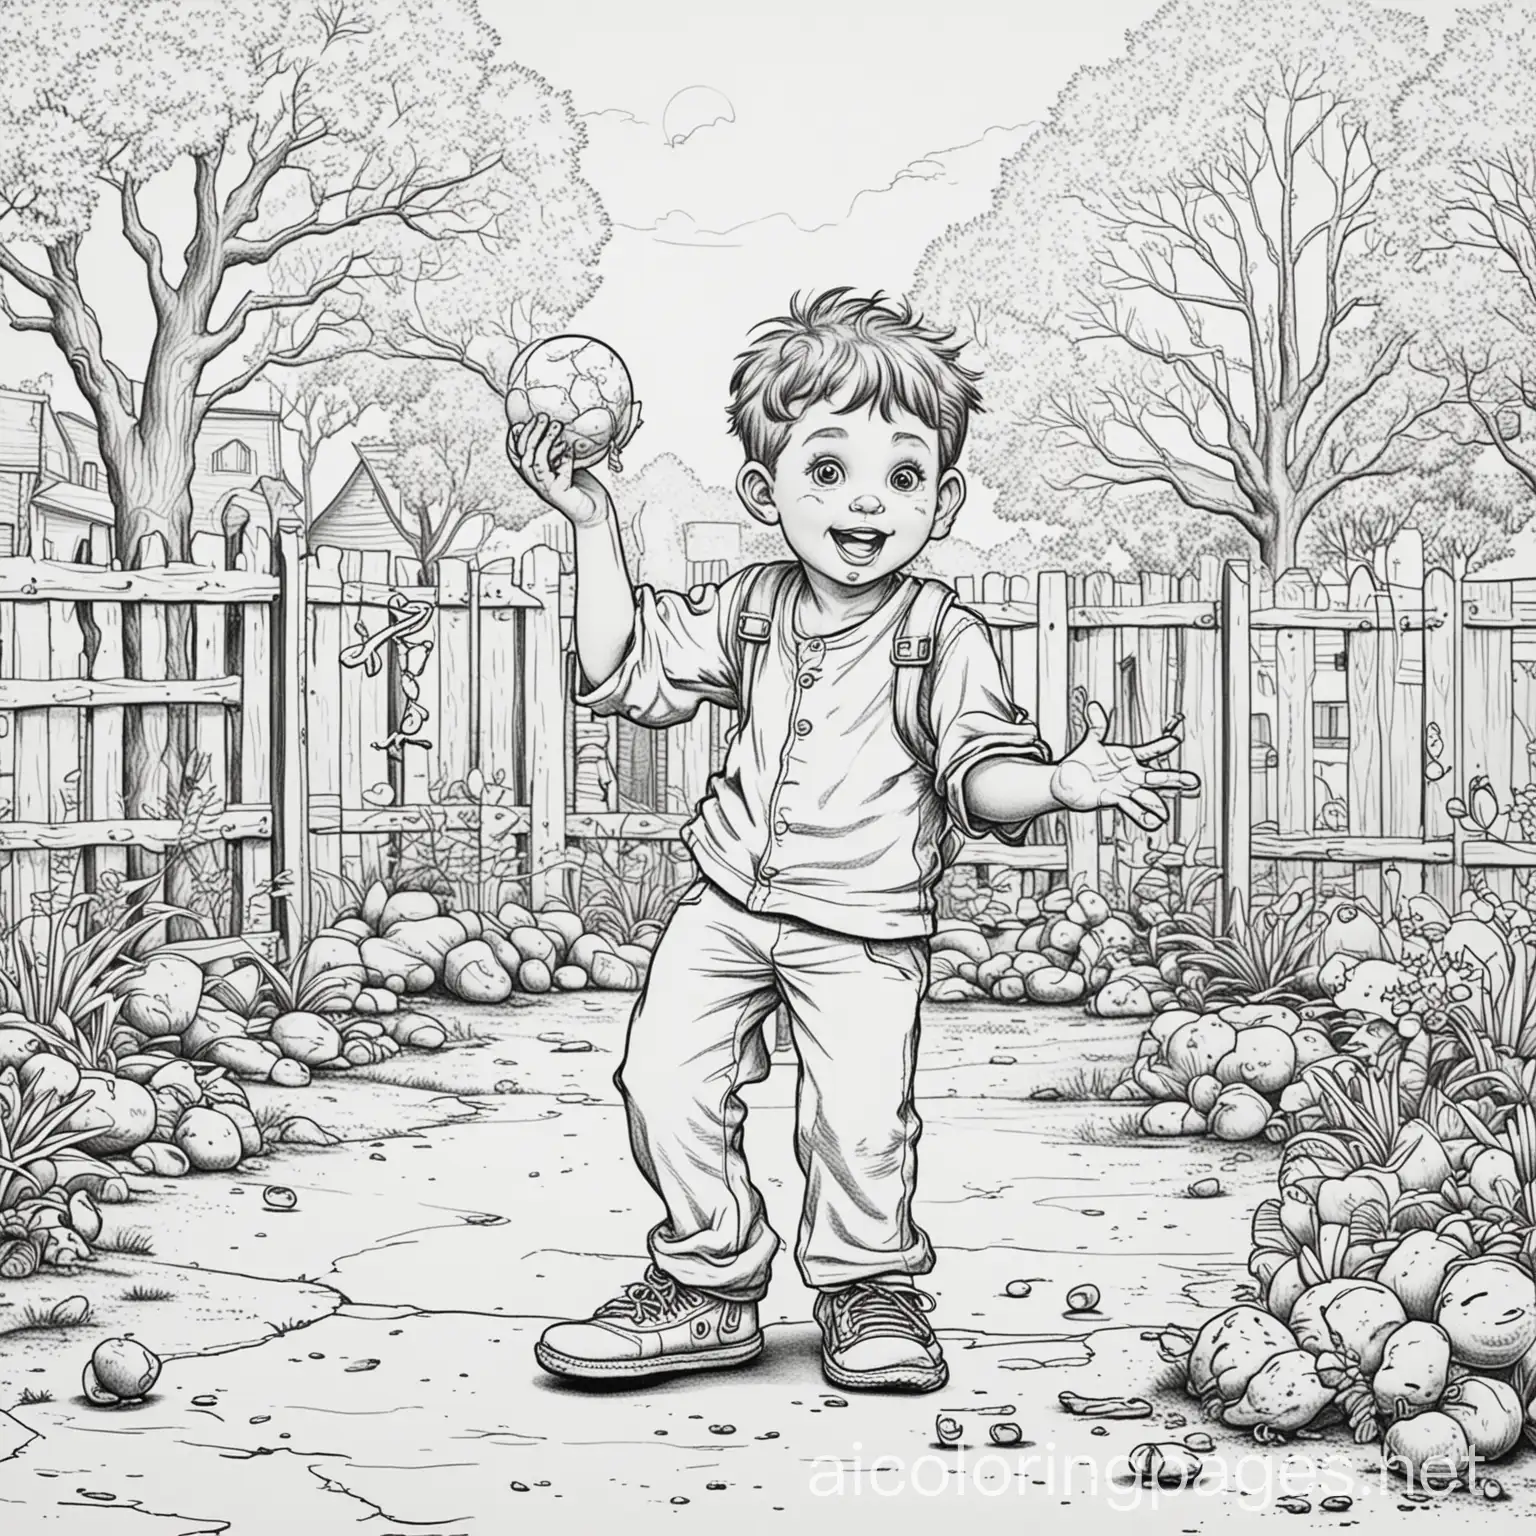 
a cartoon Boy in a ghetto park, featuring a comical talent show where local residents showcase their unique skills, such as a juggler with rubber chickens and a contortionist escape artist. Coloring Page, black and white, line art, white background, Simplicity, Ample White Space
, Coloring Page, black and white, line art, white background, Simplicity, Ample White Space. The background of the coloring page is plain white to make it easy for young children to color within the lines. The outlines of all the subjects are easy to distinguish, making it simple for kids to color without too much difficulty